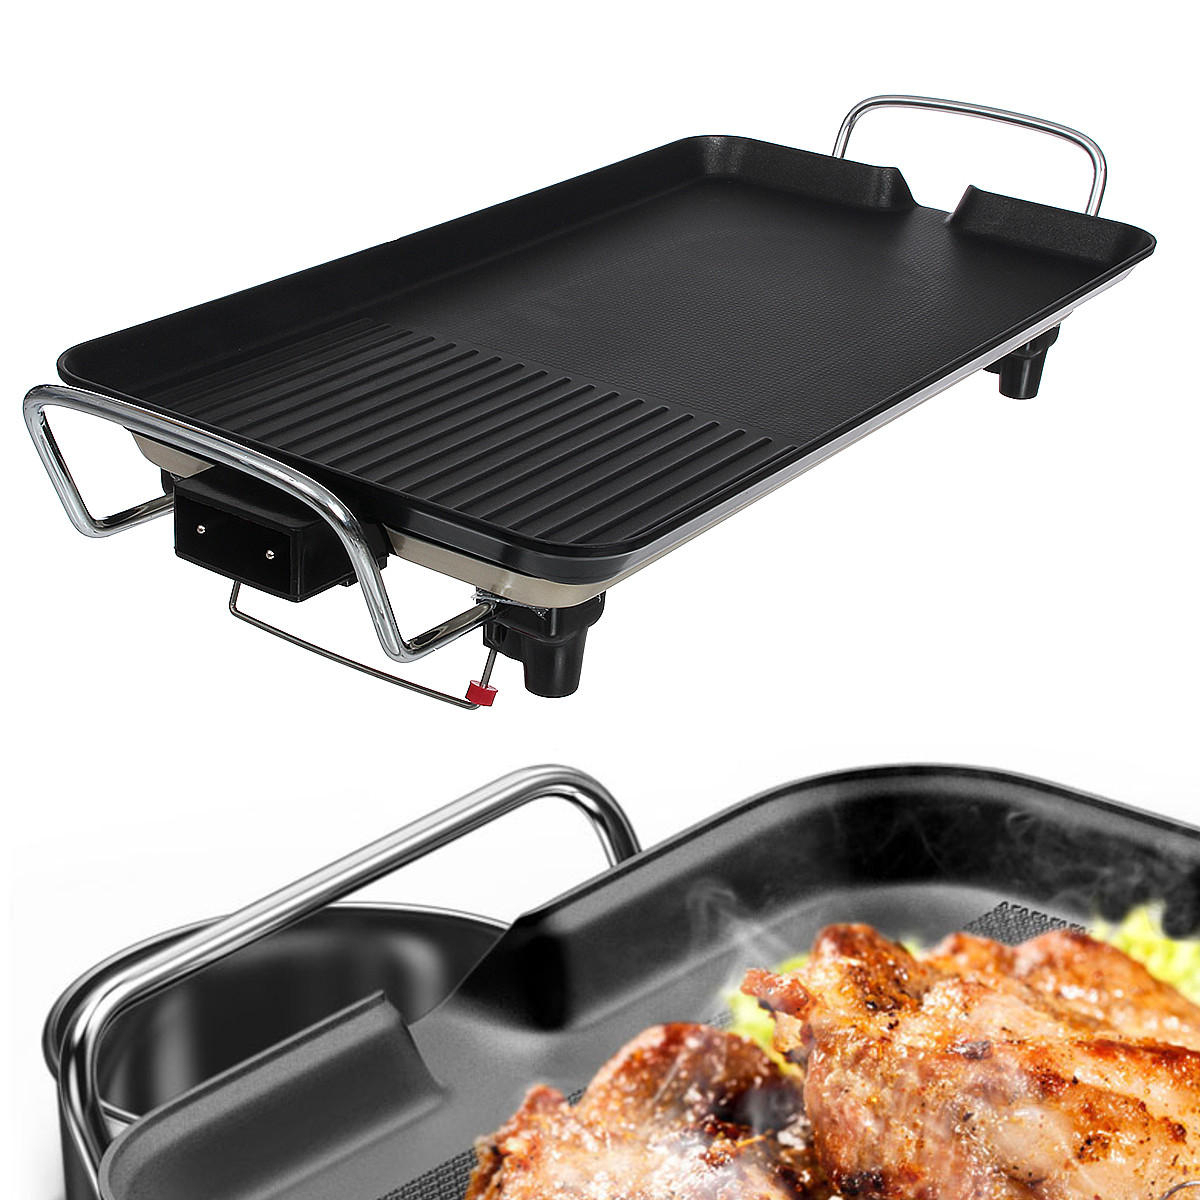 110V Smokeless Non Stick Electric Oven Baking Pan BBQ Barbecue Grill - small